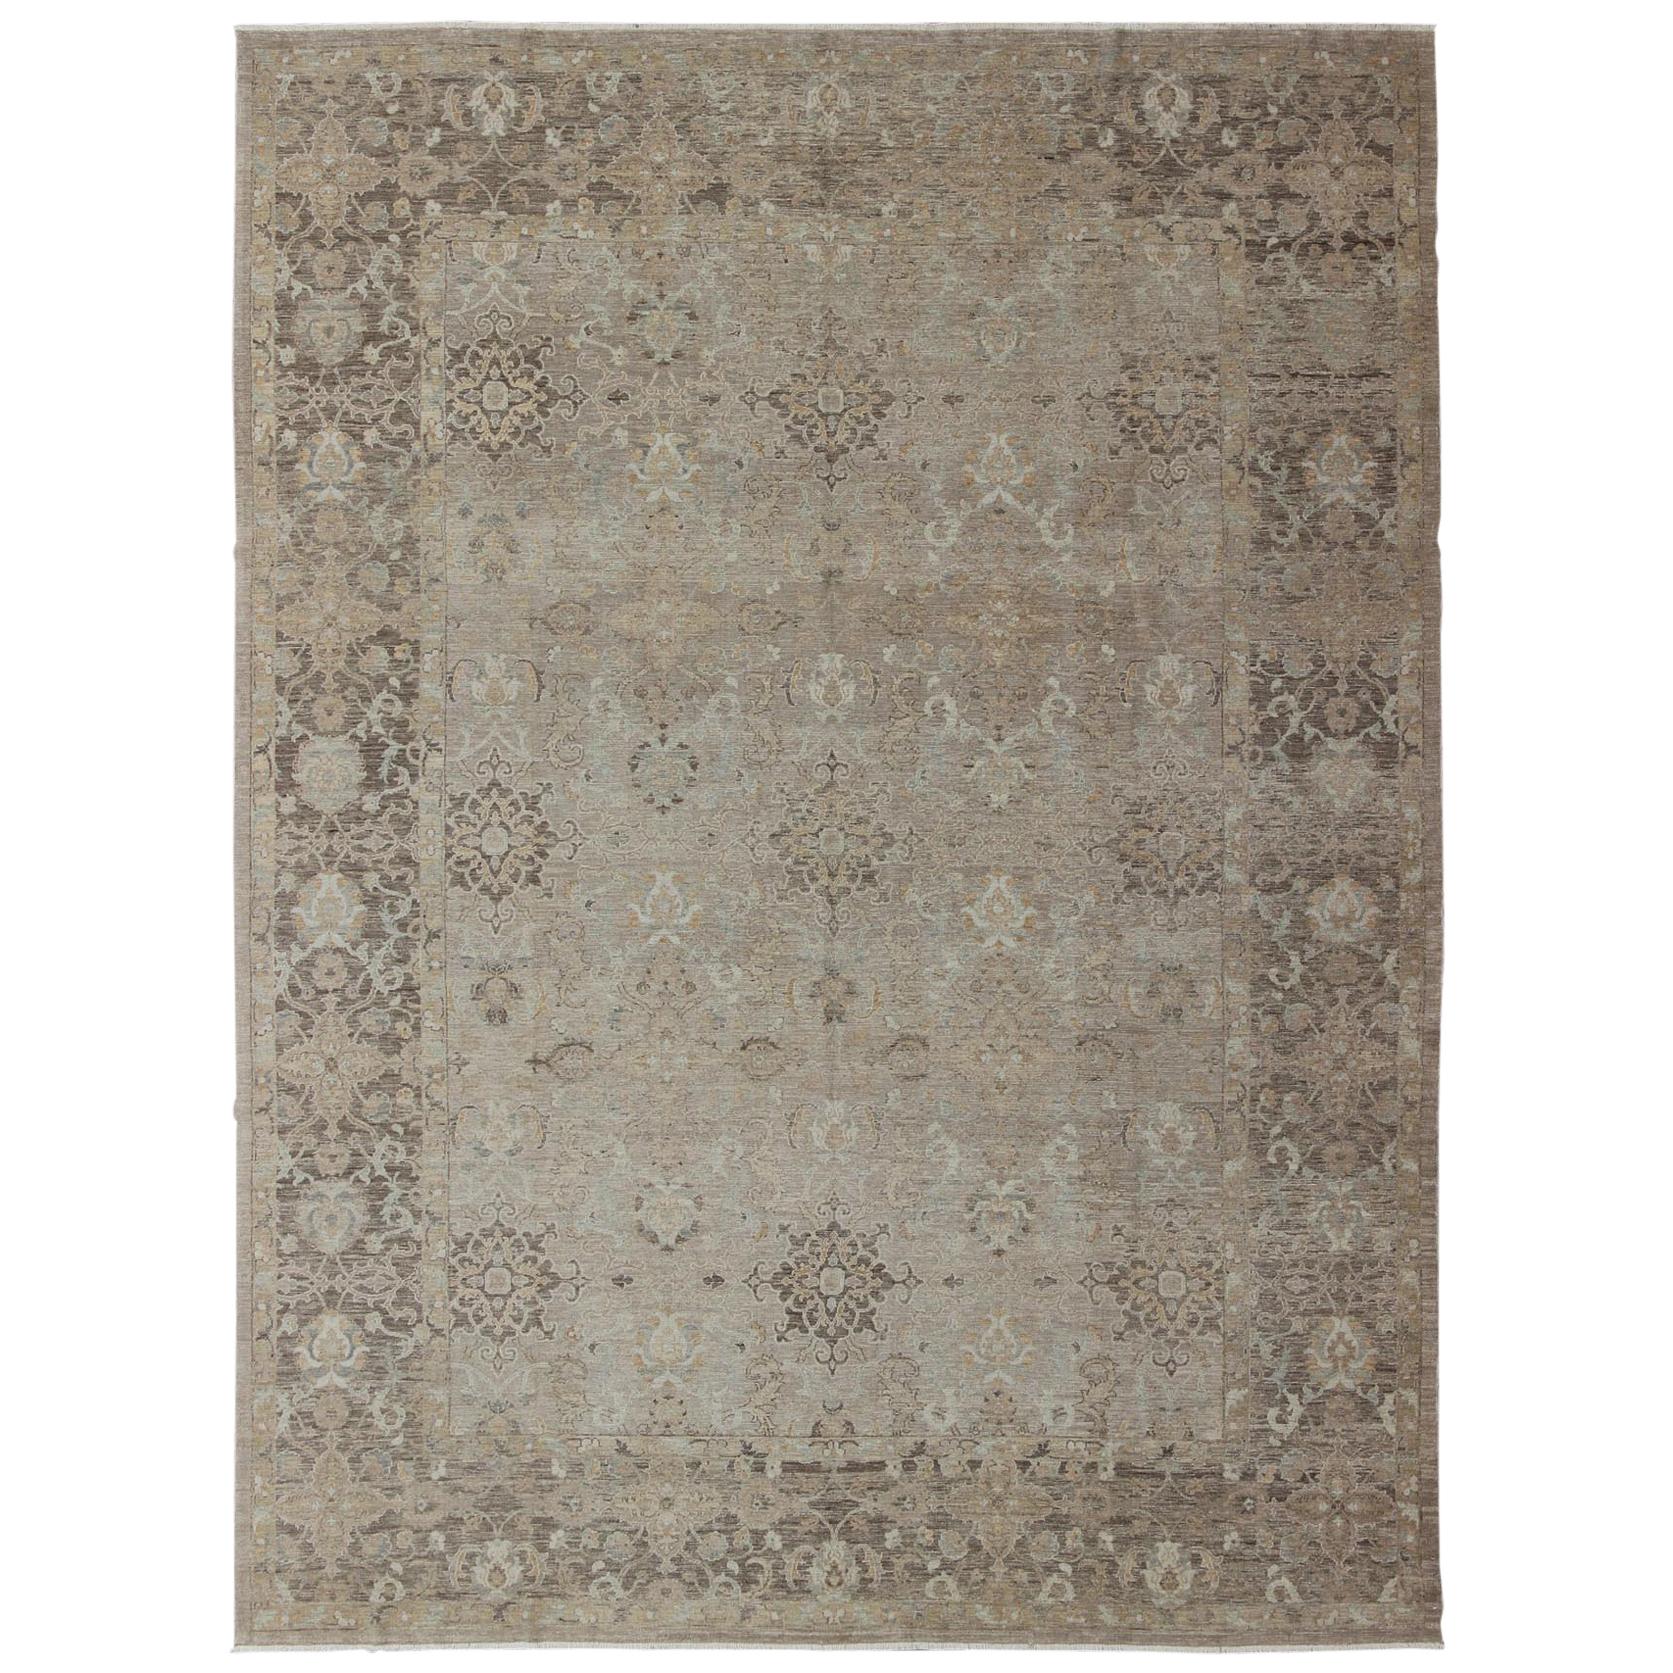 Turkish Sivas Fine Weave Rug in Taupe, Gray, Ivory and Brown and Cream Colors For Sale